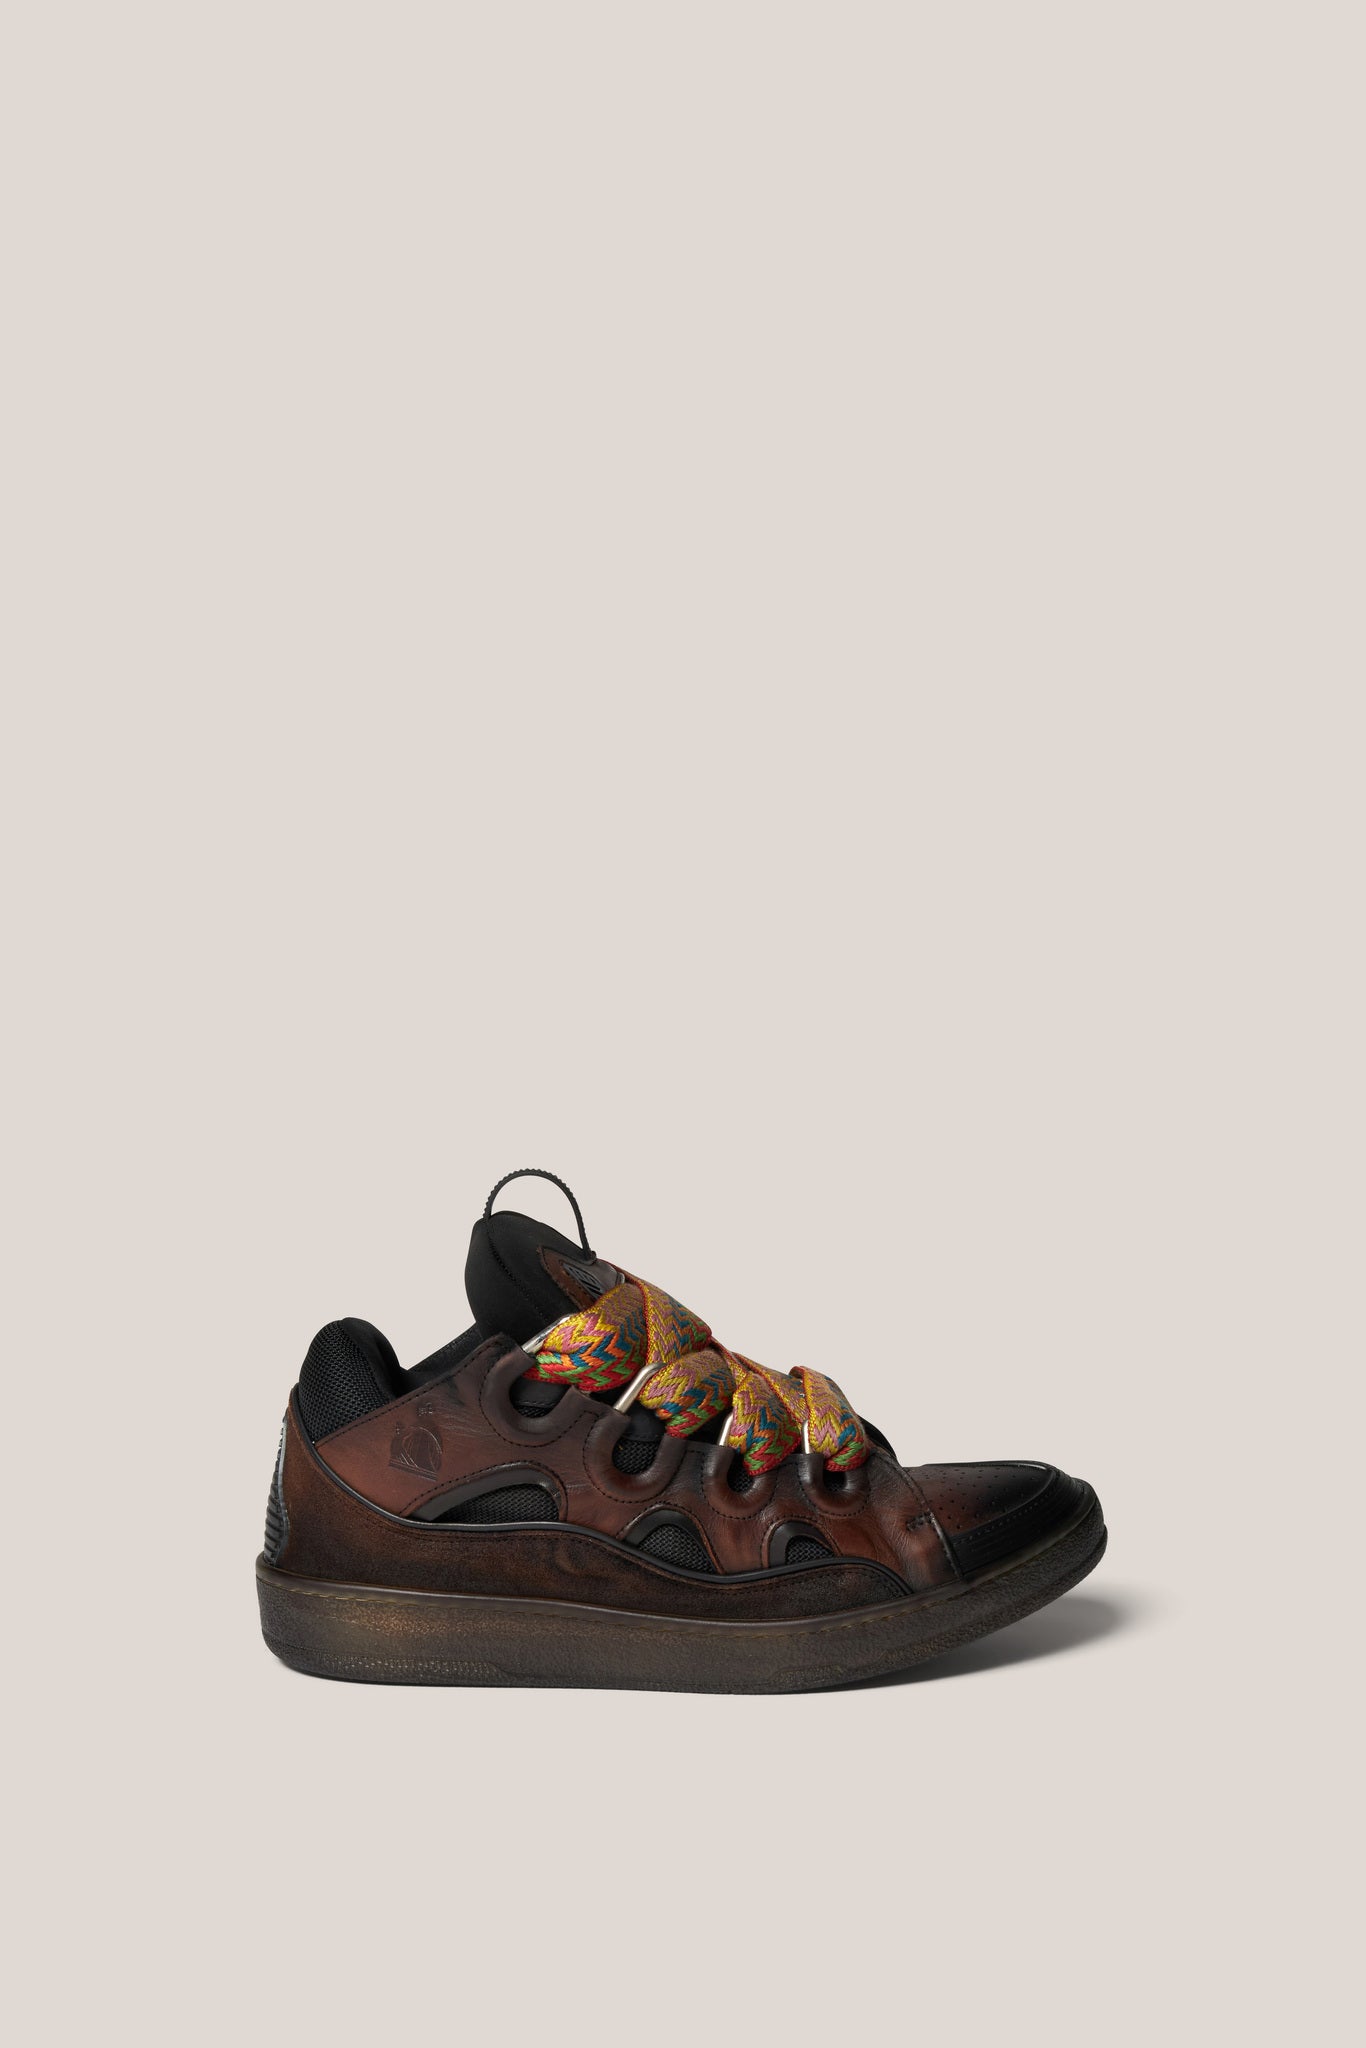 Black And Brown Curb Sneakers